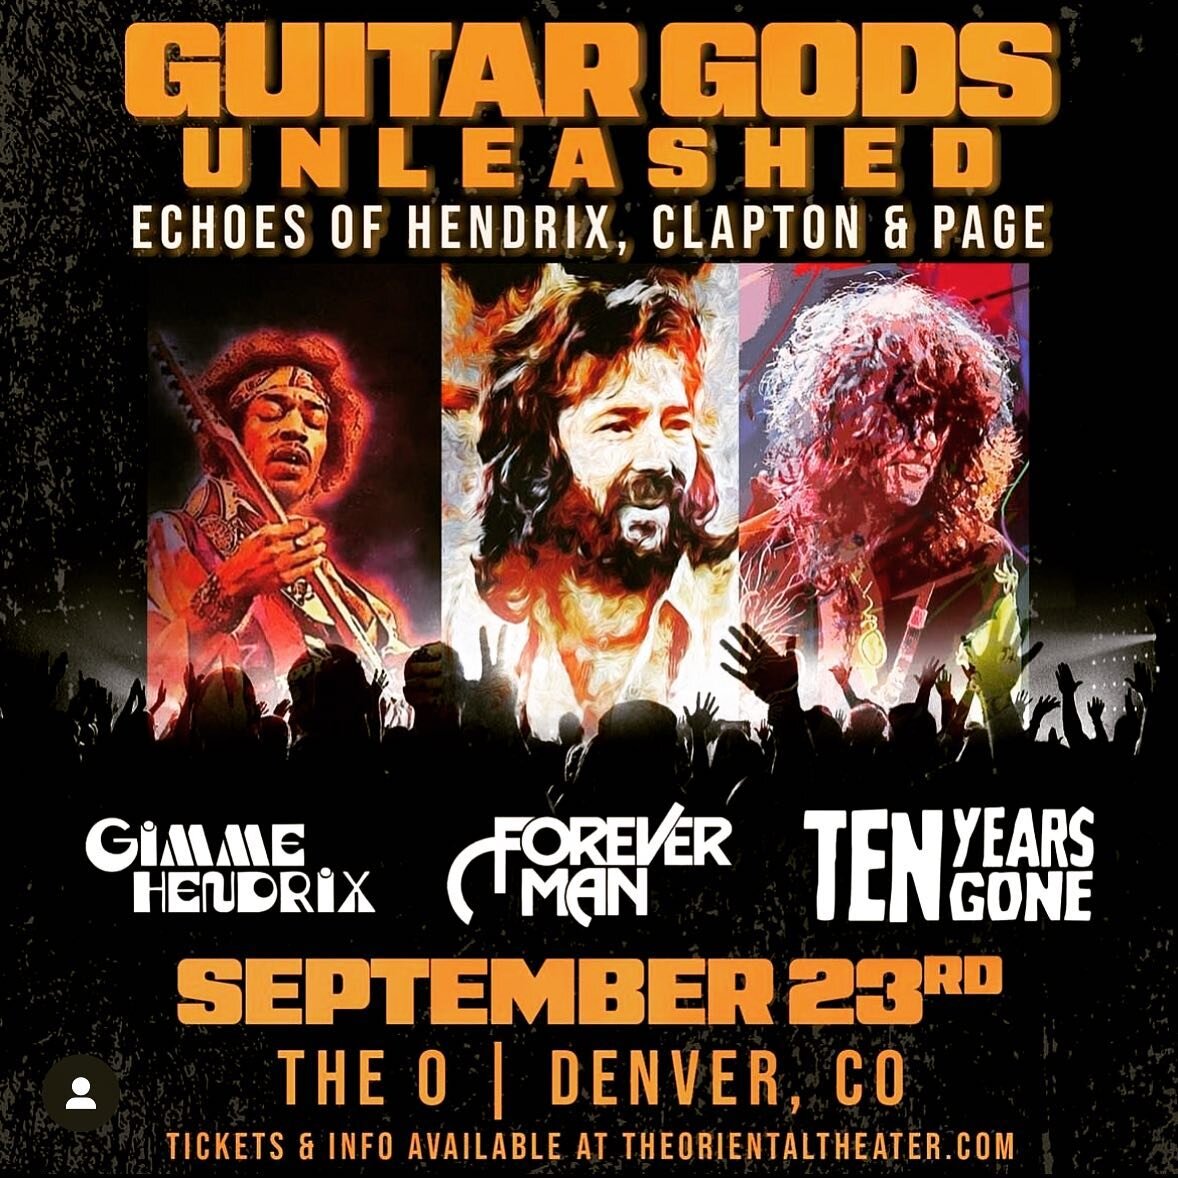 💥SAT. 9/23 @theorientaltheater&mdash; Ten Years Gone brings the electric magic of Led Zeppelin to &quot;Guitar Gods Unleashed&quot; - Ft. the music of Clapton, Hendrix, &amp; Page. Thrilled to be joined by Gimme Hendrix &amp; Forever Man! We have an